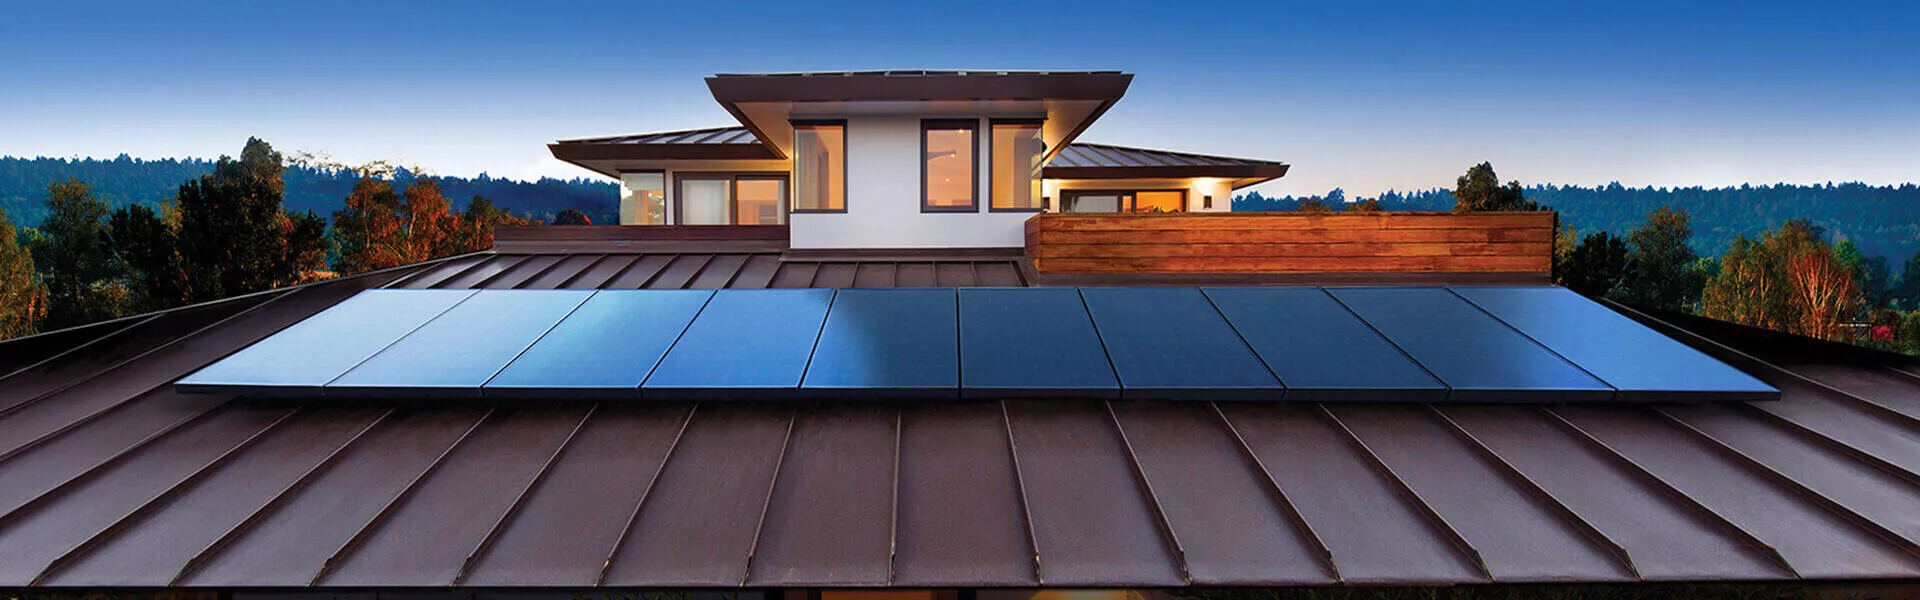 How to Buy High Efficiency Solar Panels for Your Home